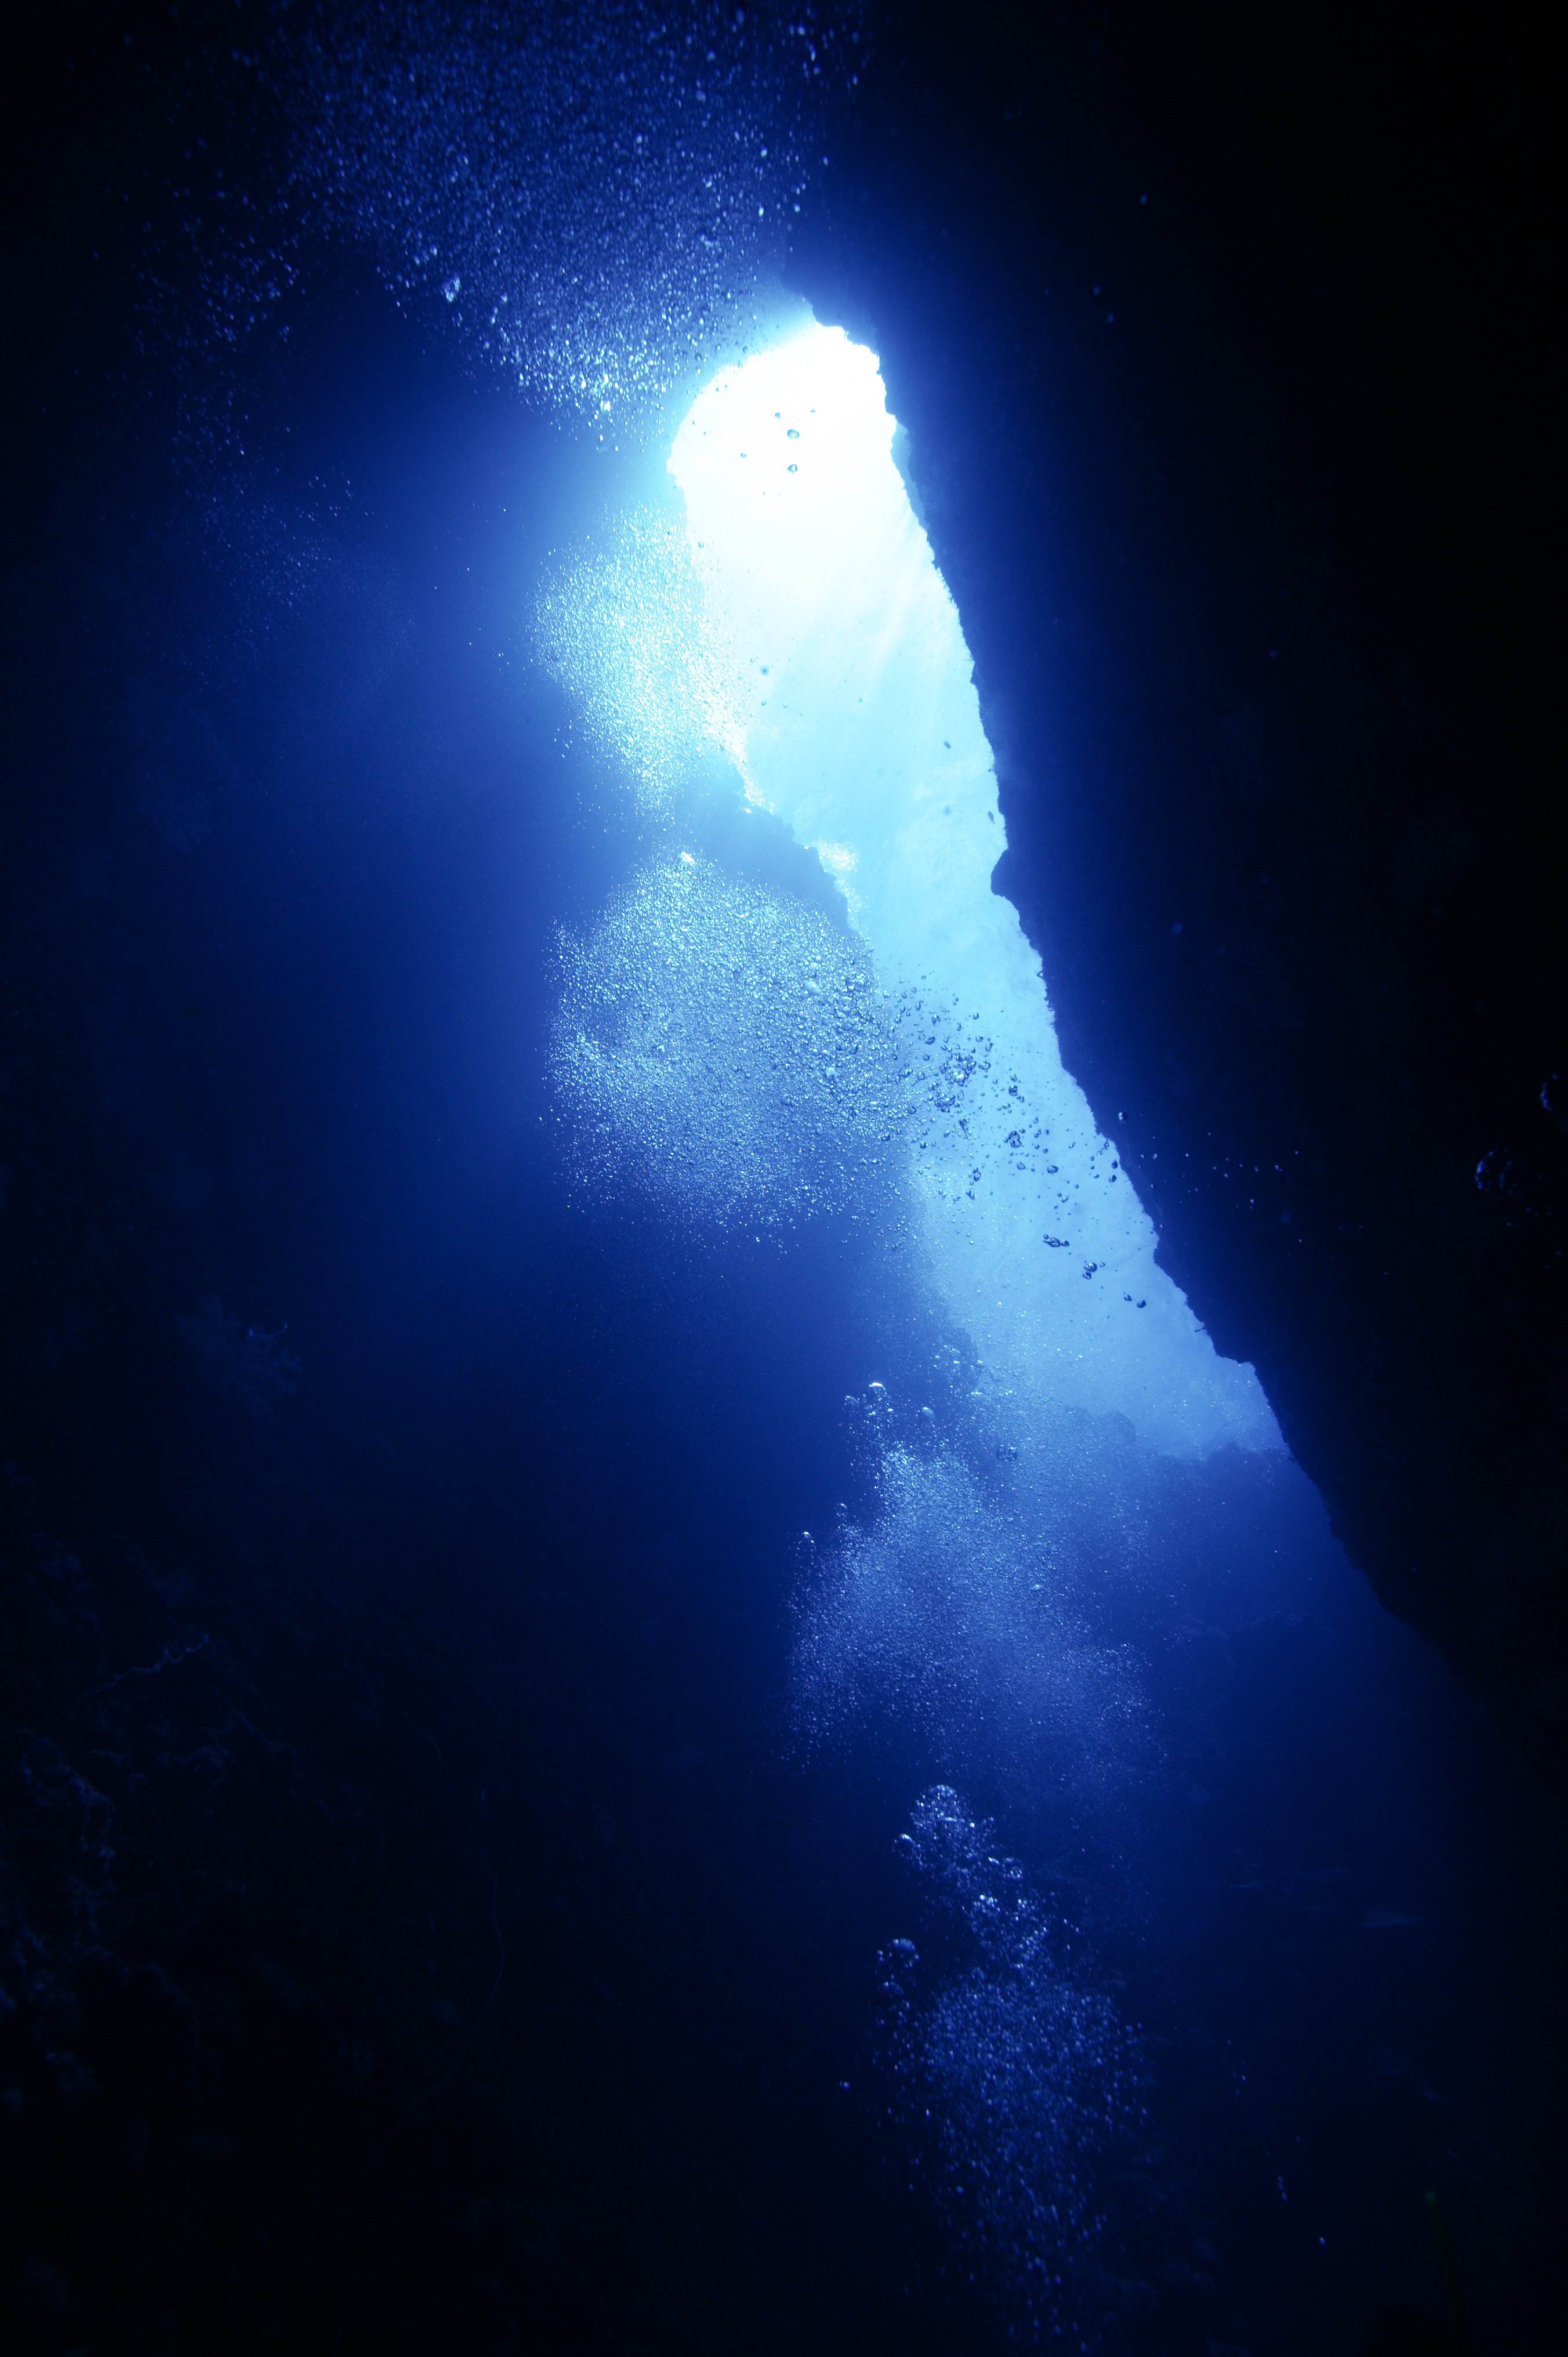 photo,material,free,landscape,picture,stock photo,Creative Commons,Go into an underwater cave, cave, bubble, Blue, In the sea